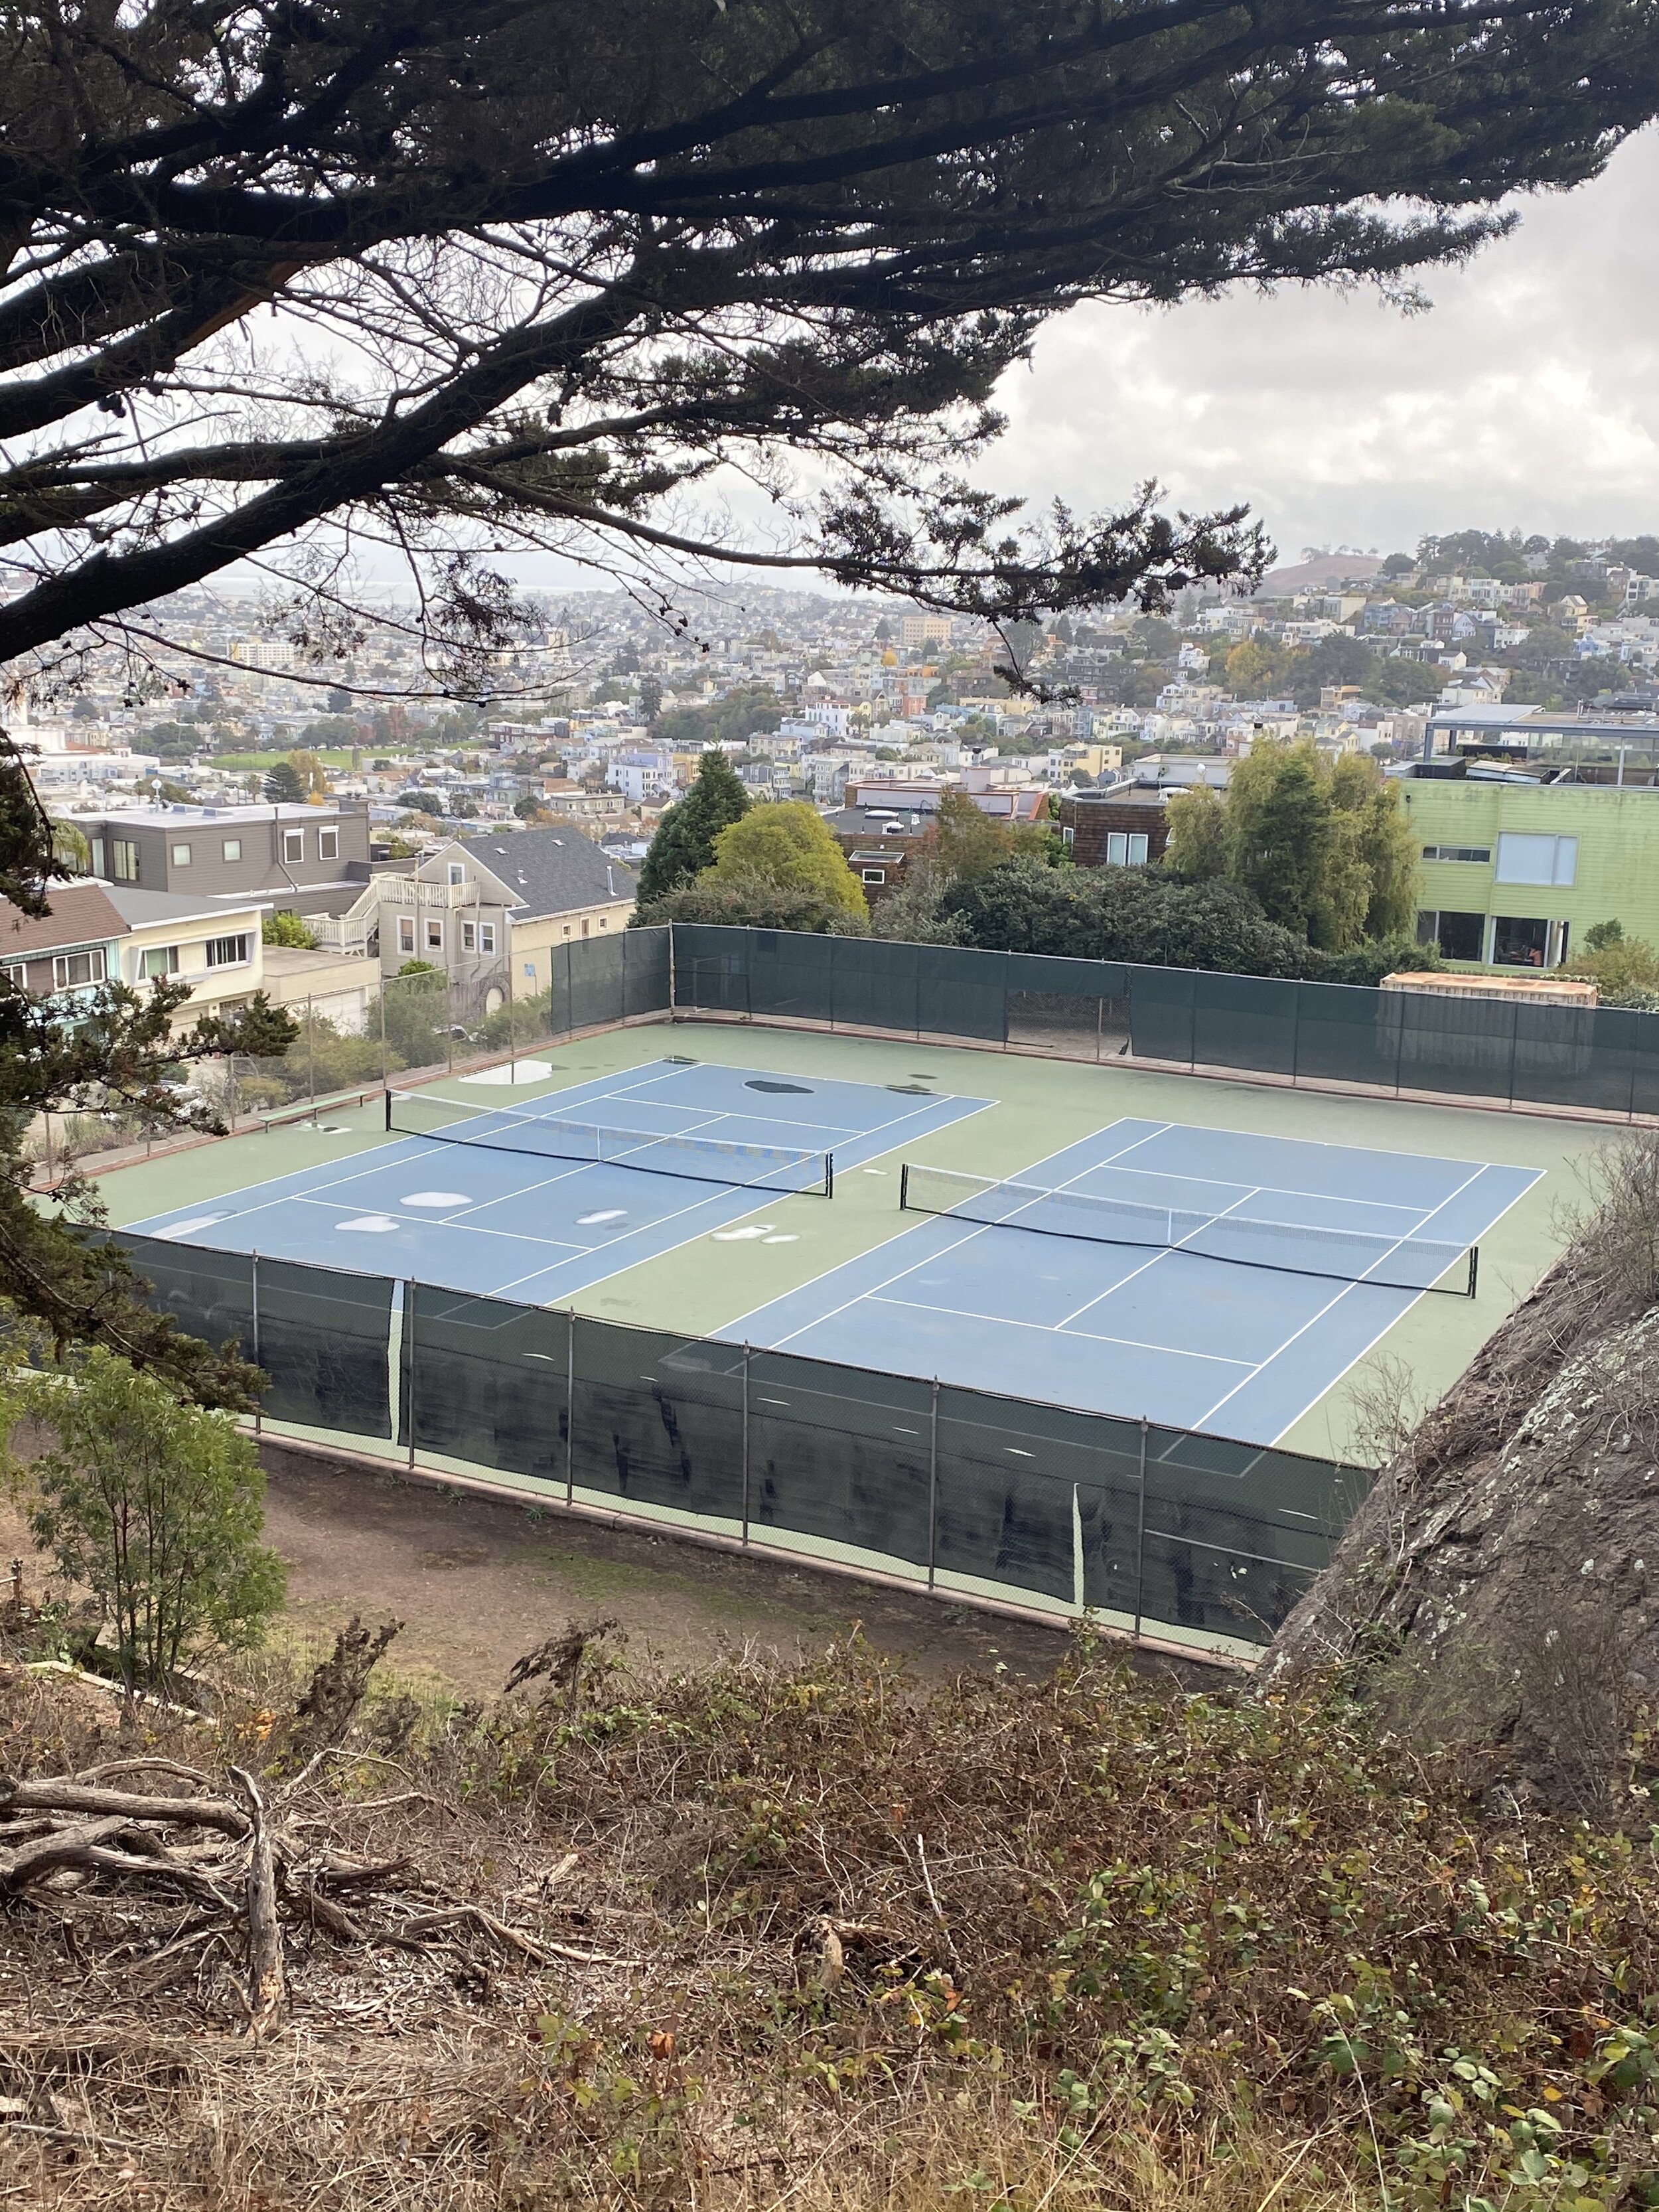 No Reservation? No Problem! OPEN Tennis Courts in SF that you cant find on Spotery! — Squadz